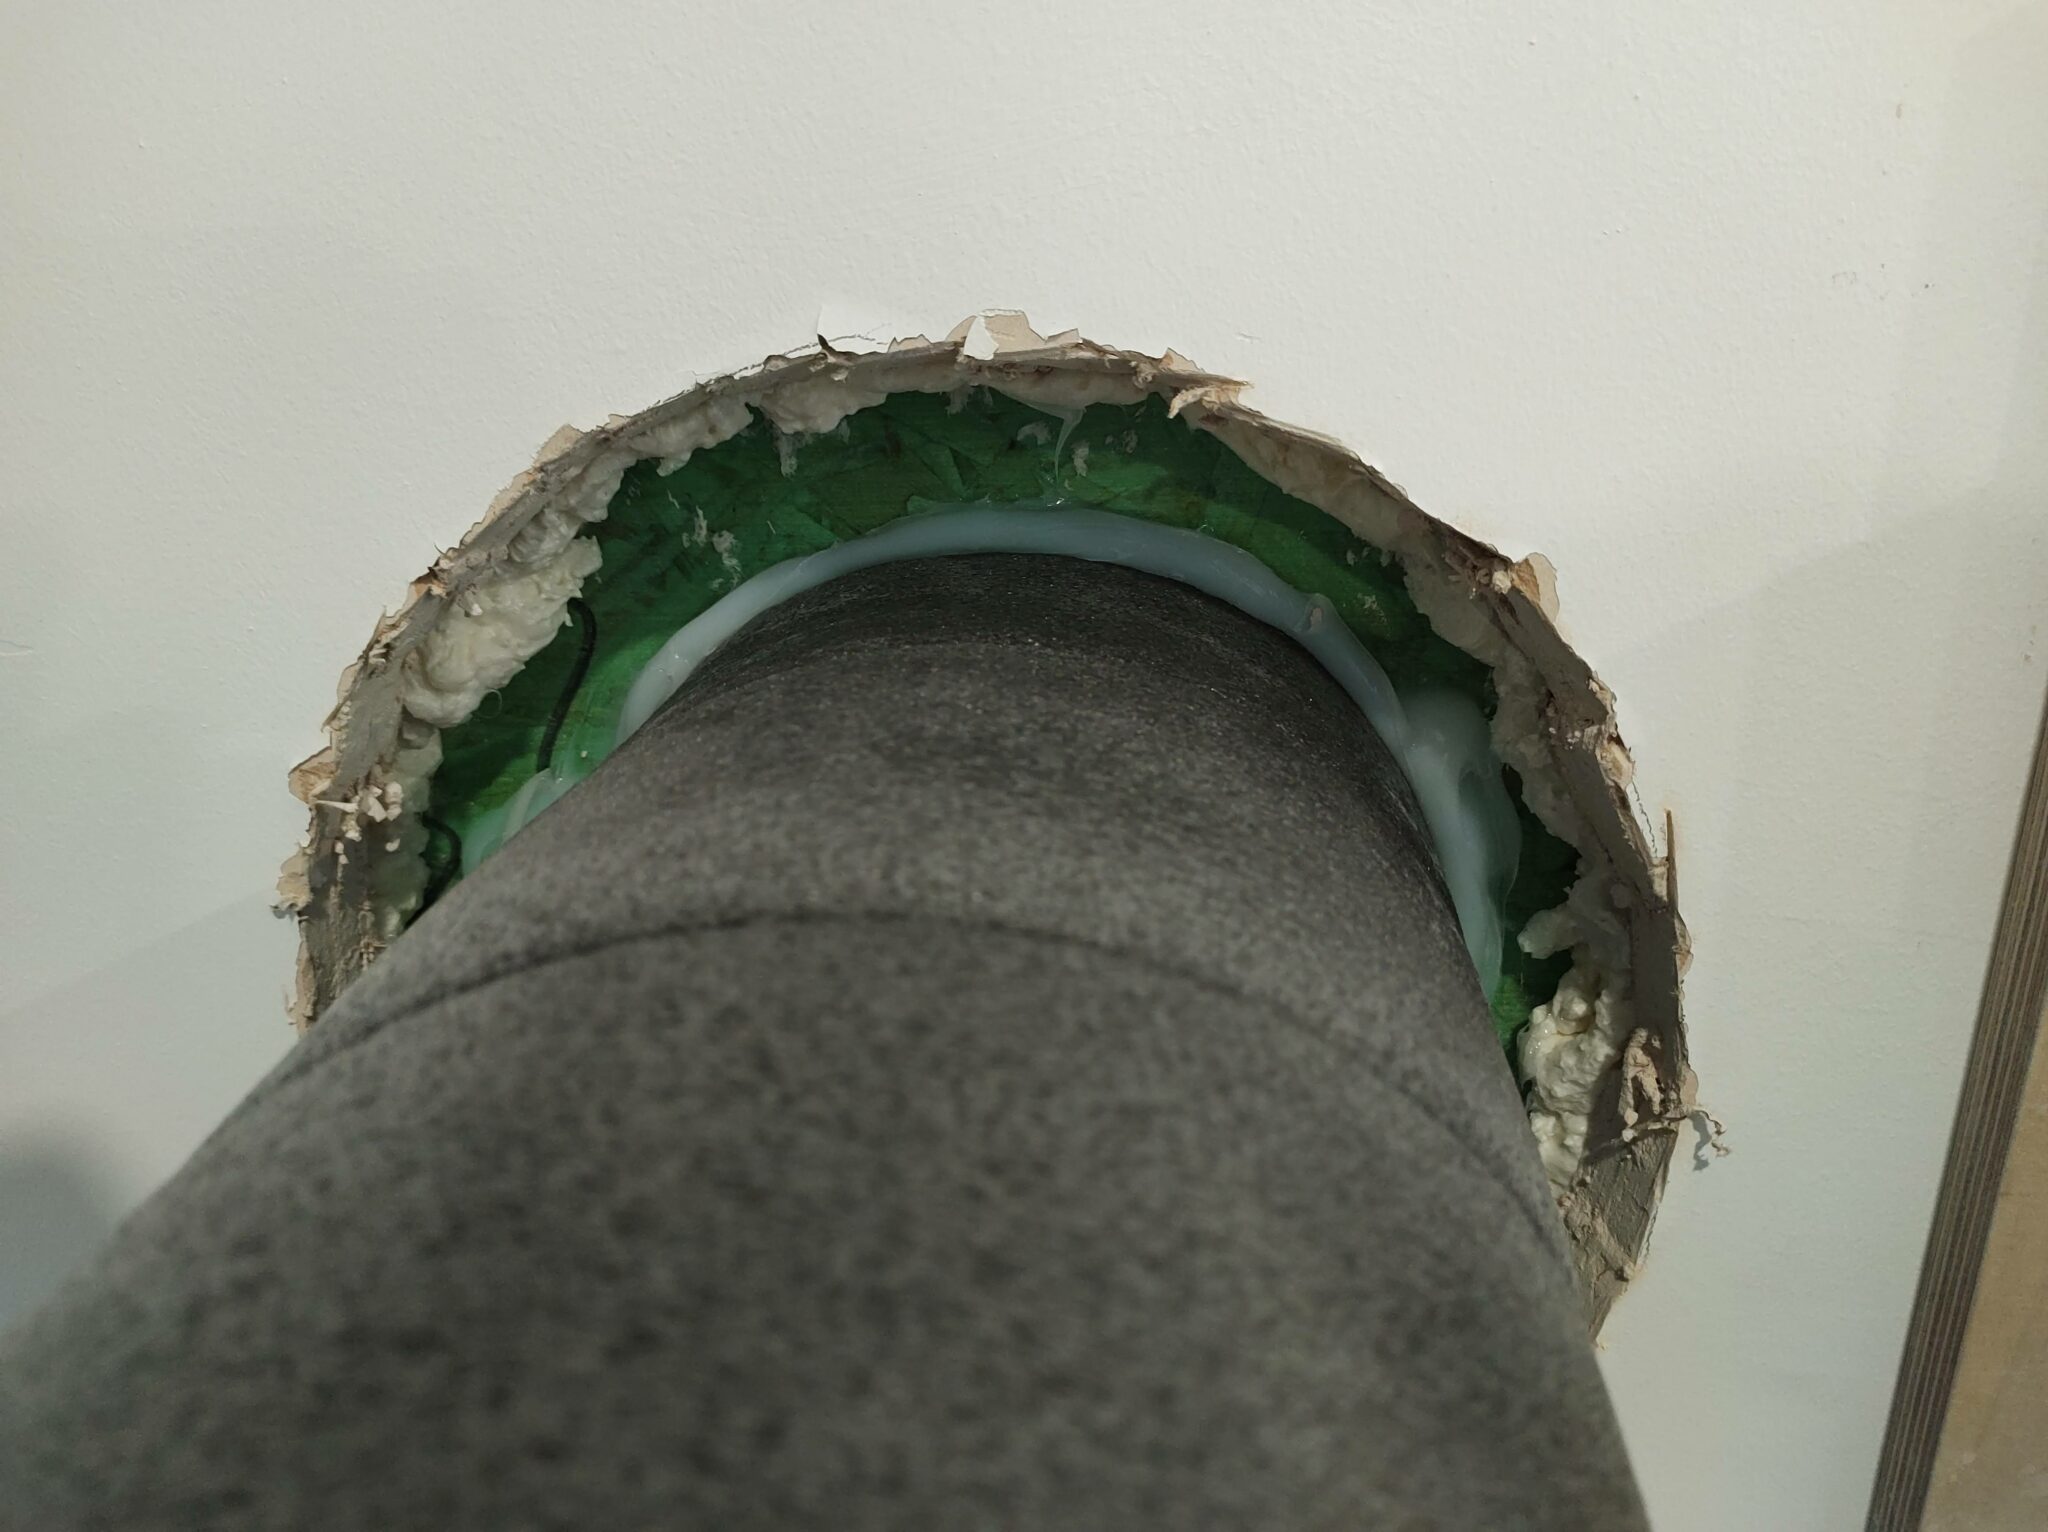 An external pre-insulated MVHR duct sealed with airtightness tape